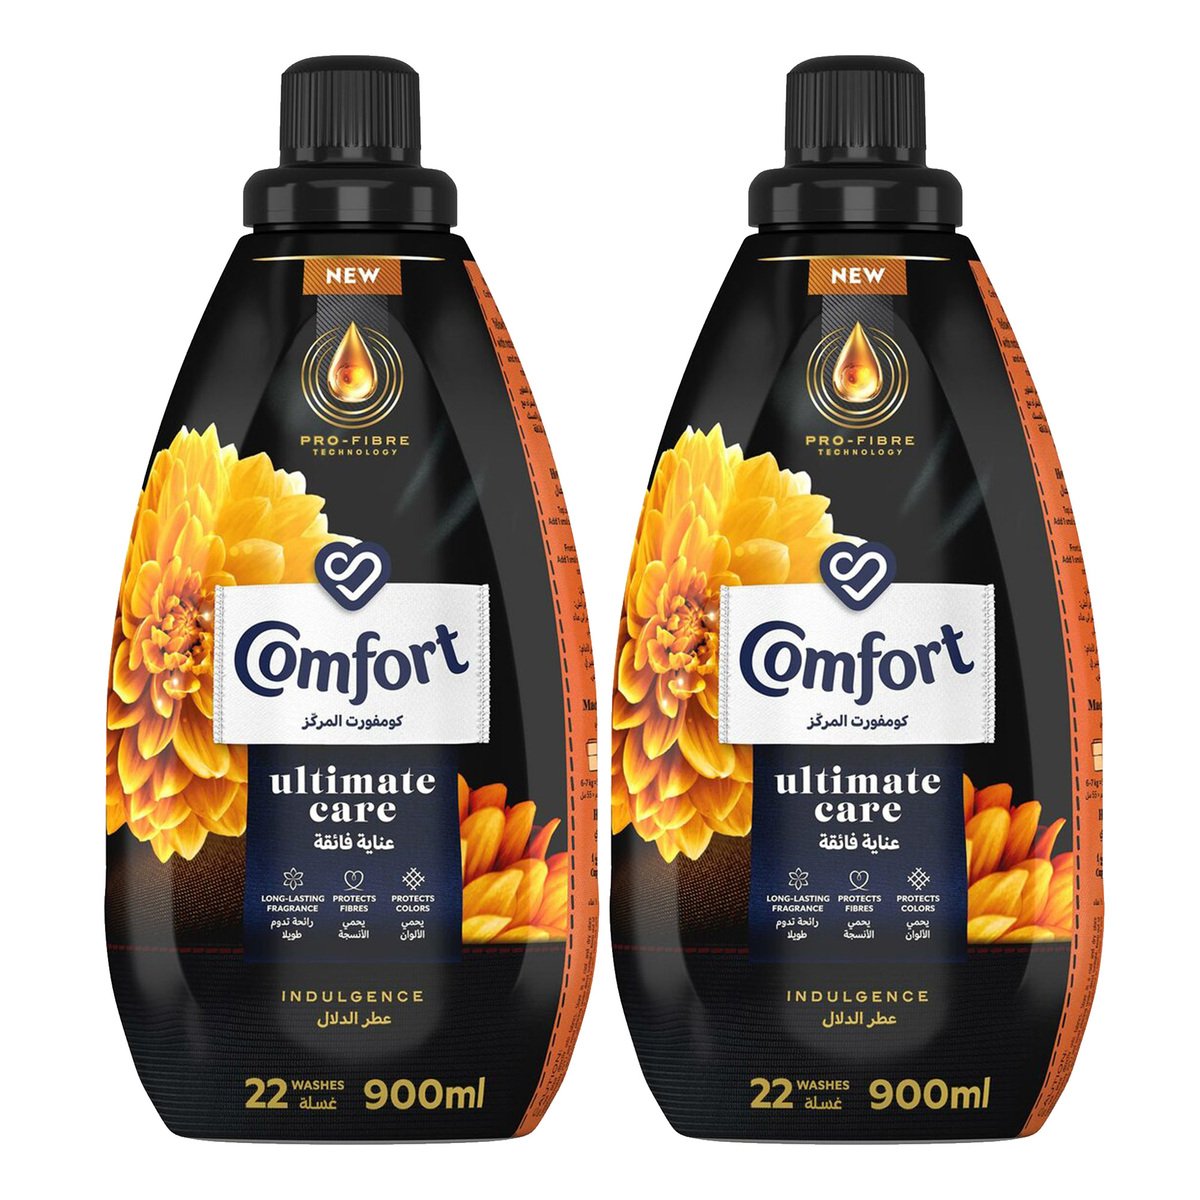 Comfort Ultimate Care Concentrated Fabric Softener Indulgence 2 x 900ml